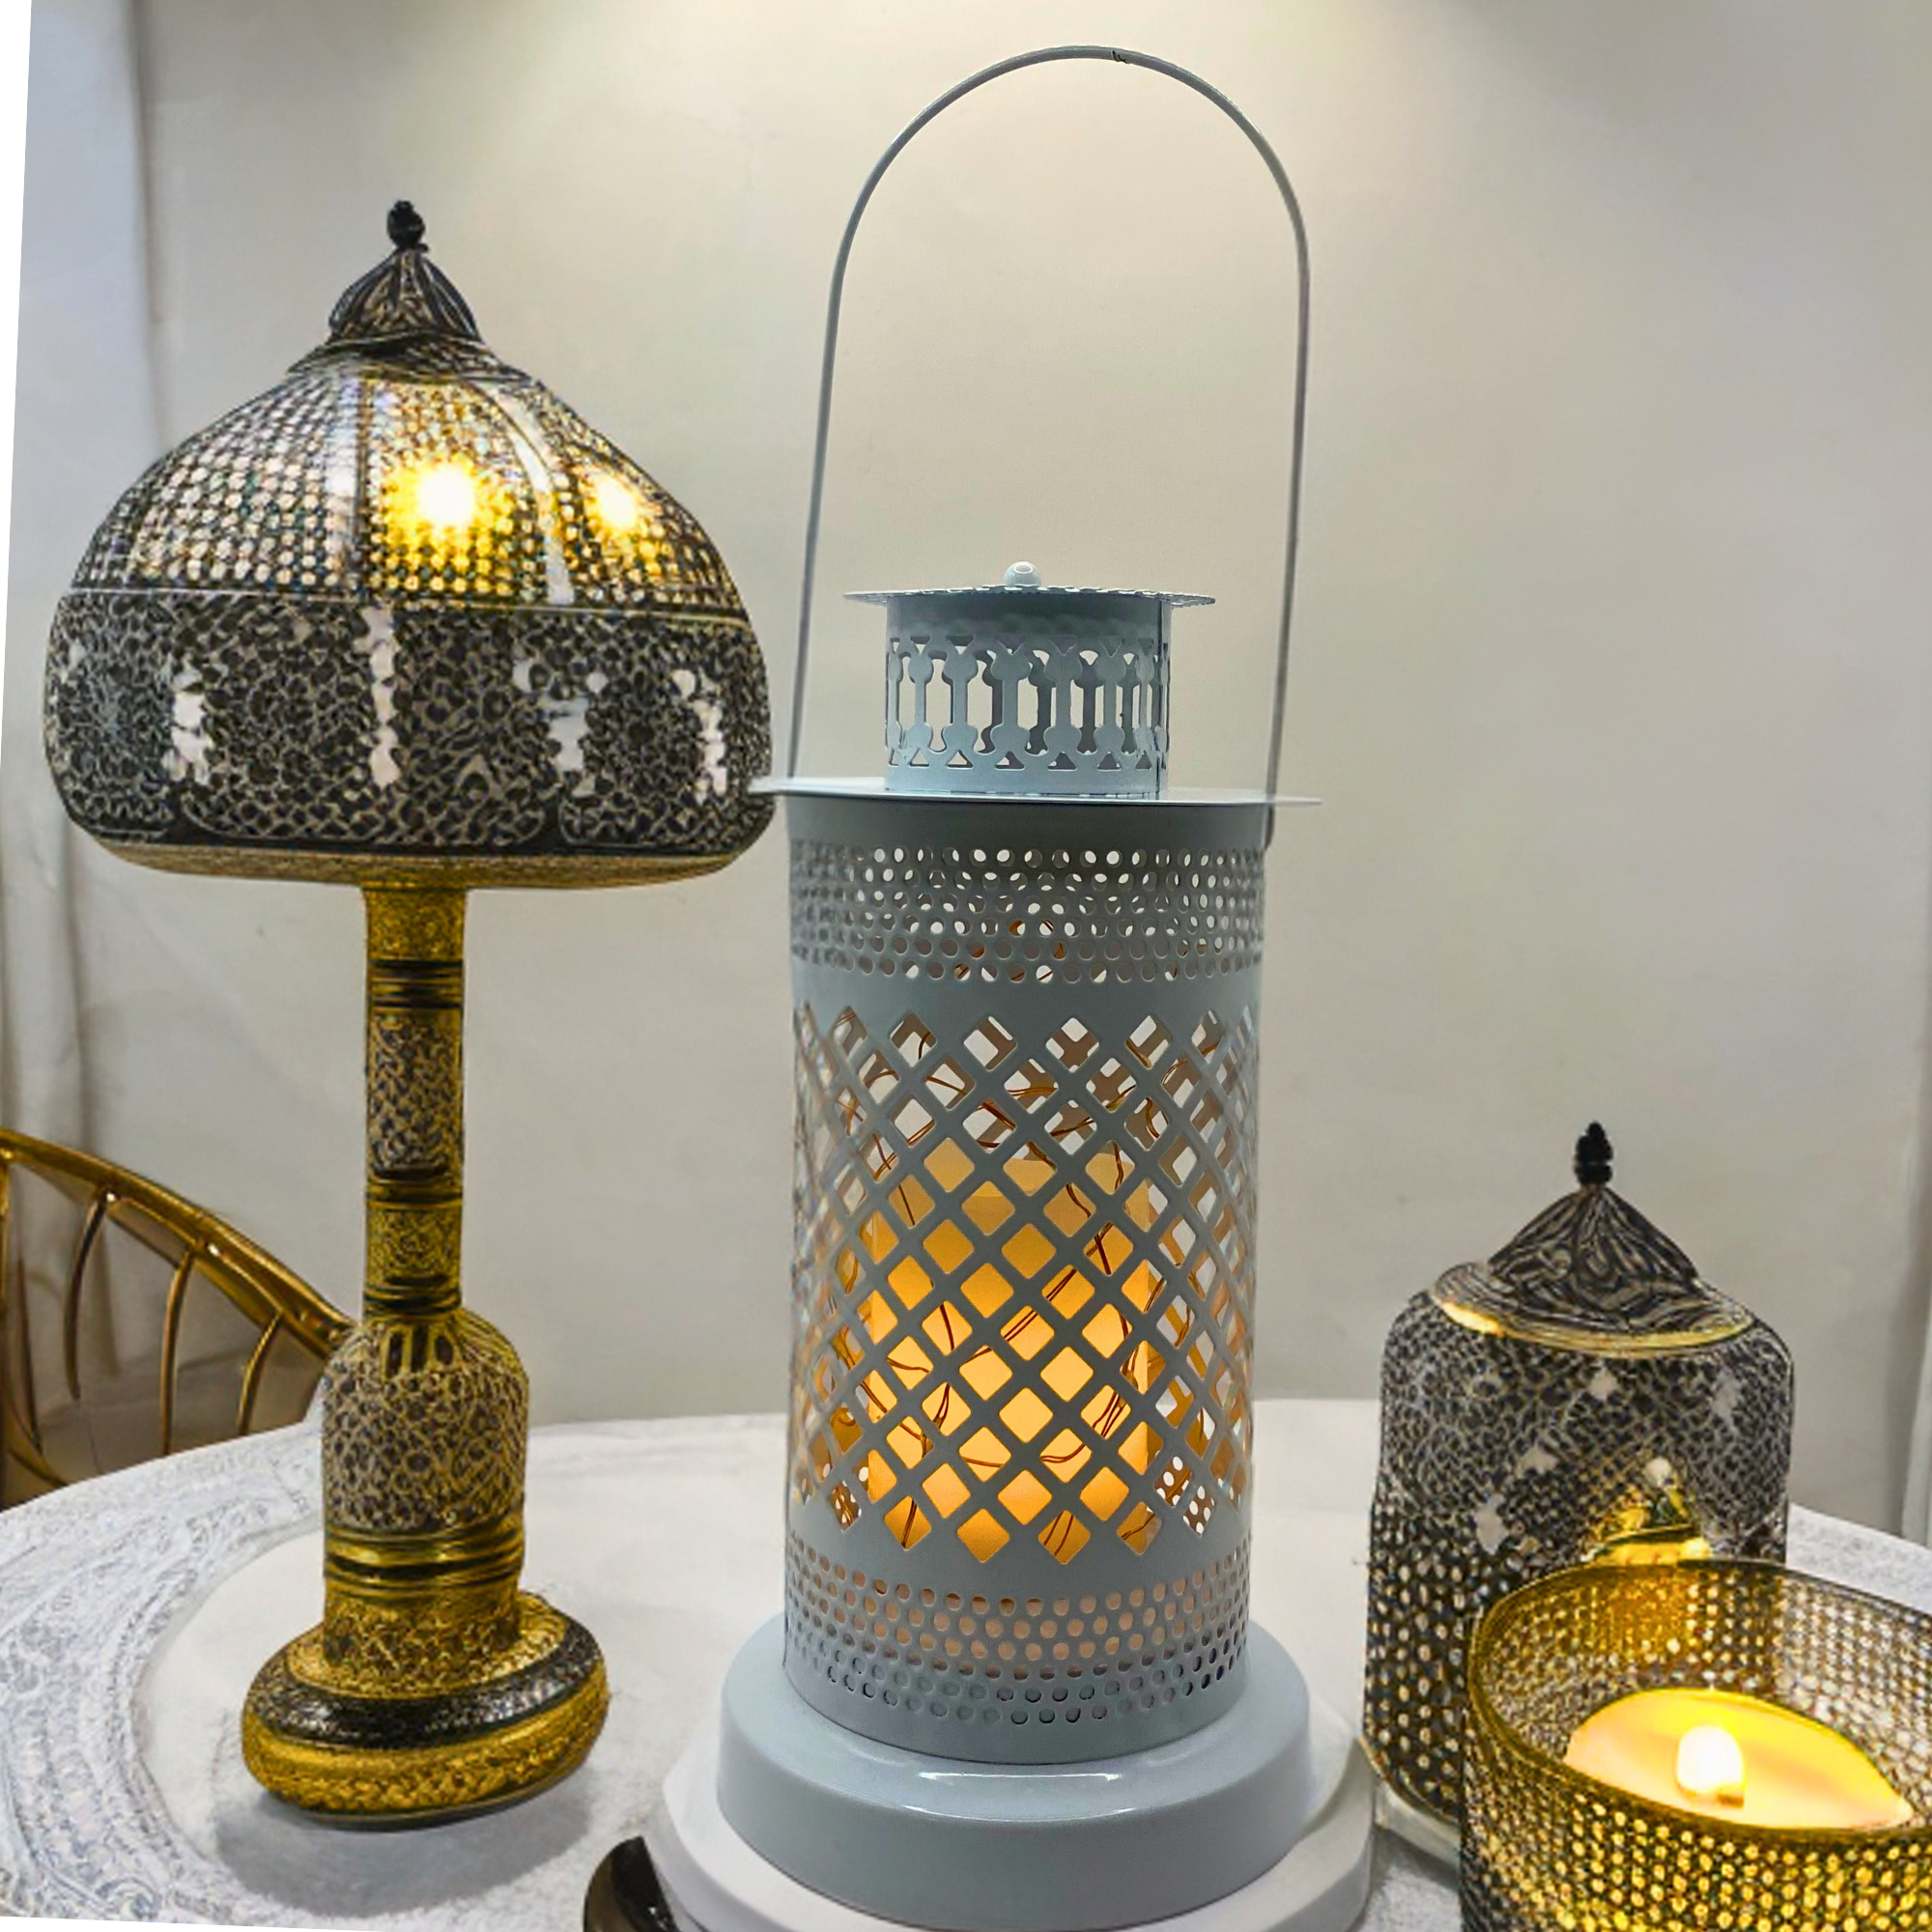 Islamic Candle Holder With String Lights